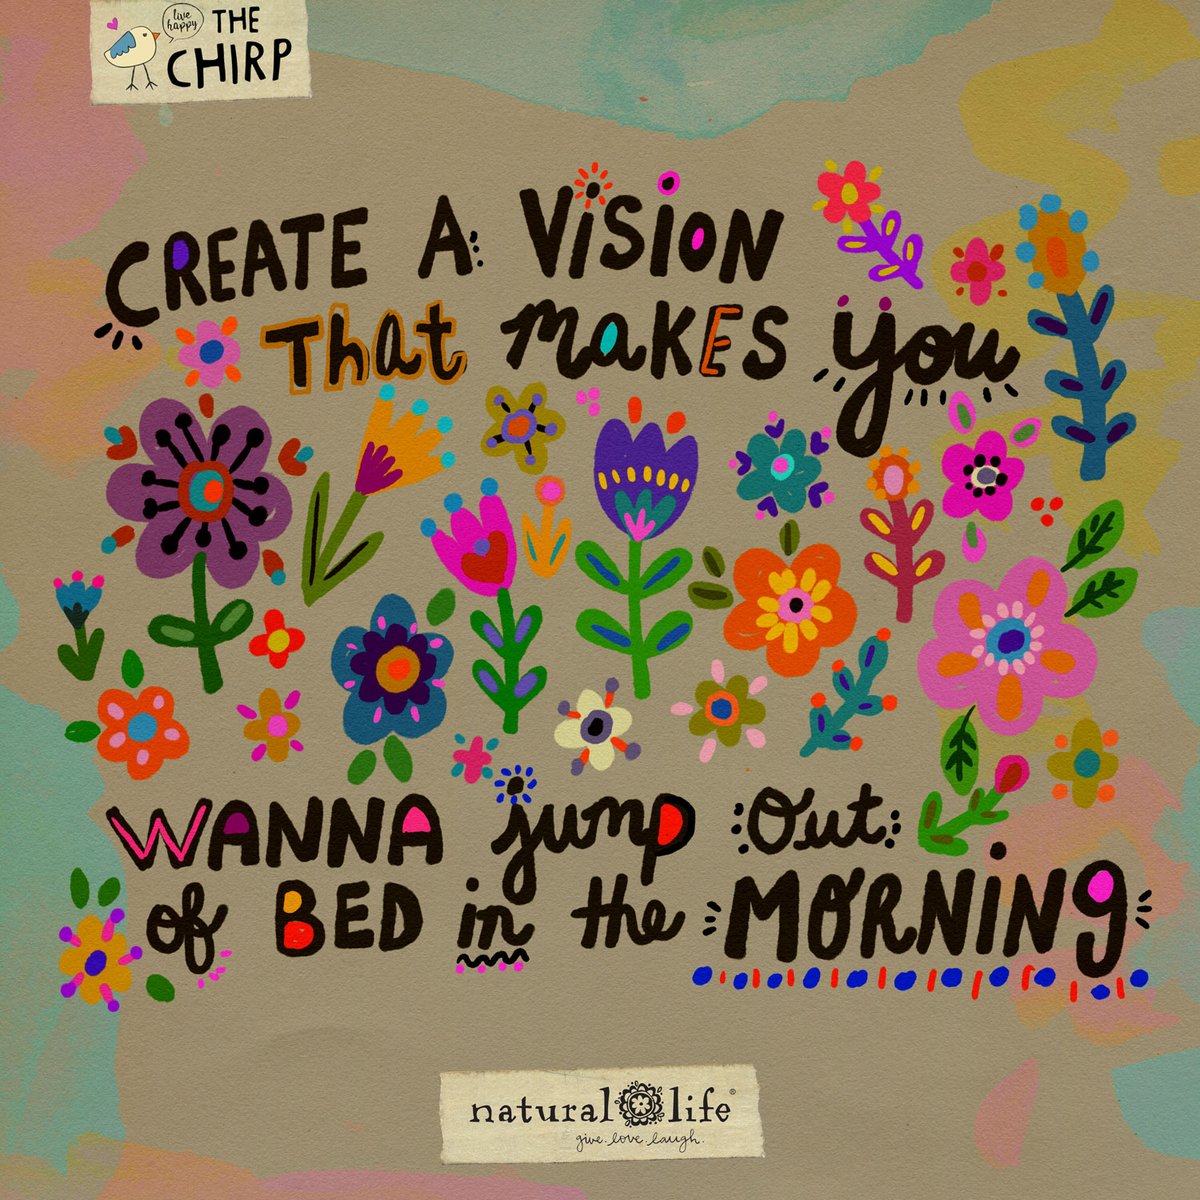 Create a vision that makes you wanna jump out of bed in the morning. ~ Simply, it's great to be motivated!